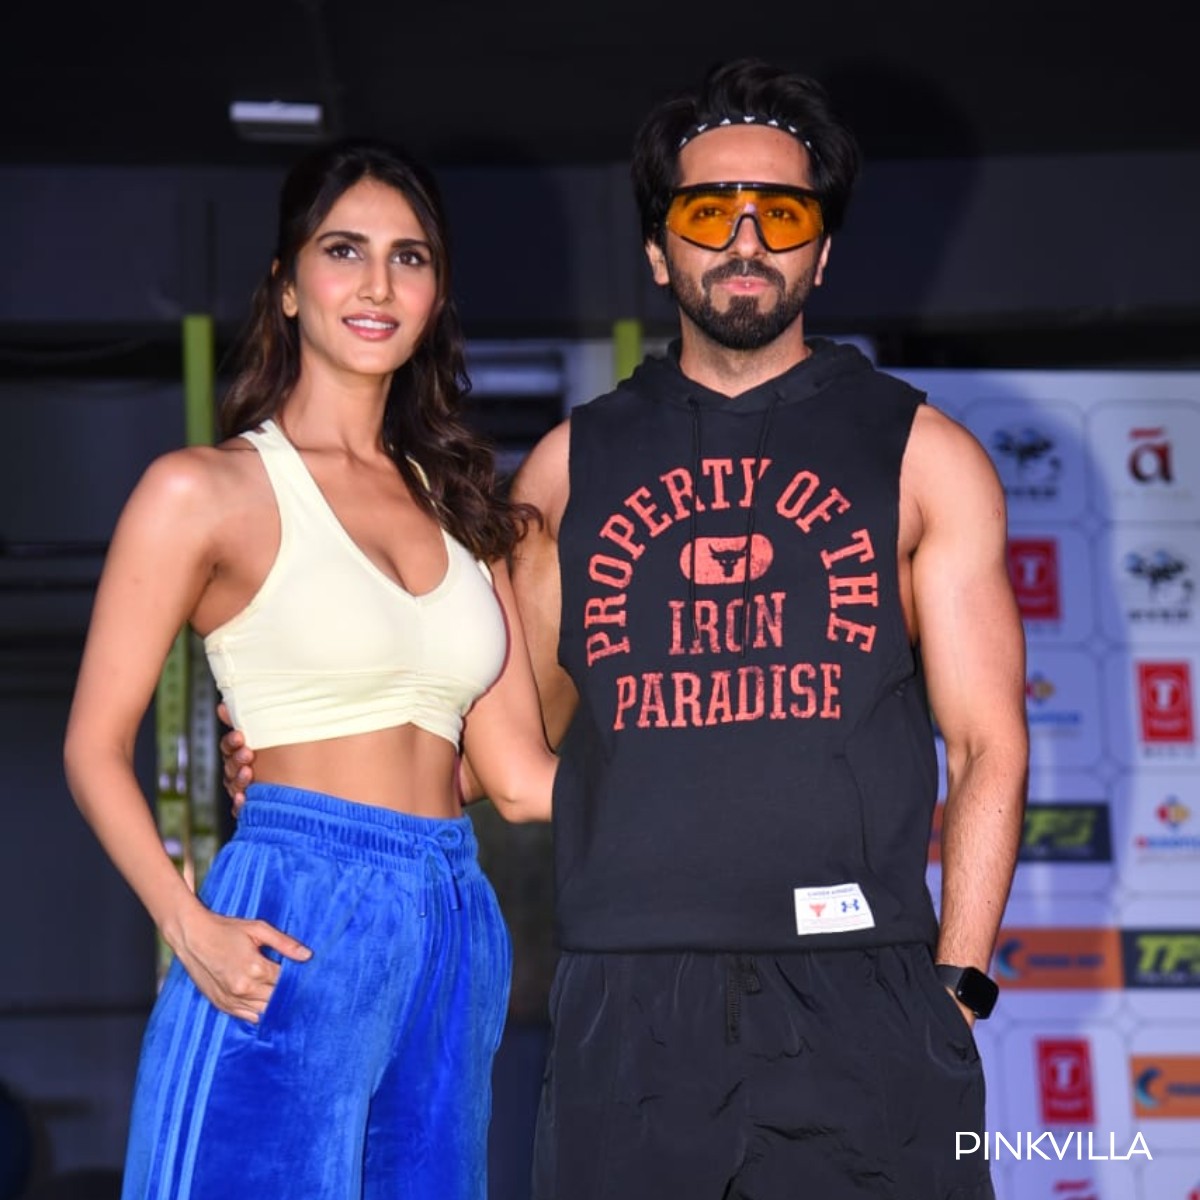 PICS: Ayushmann Khurrana &amp; Vaani Kapoor are well, looking very hot as they promote Chandigarh Kare Aashiqui